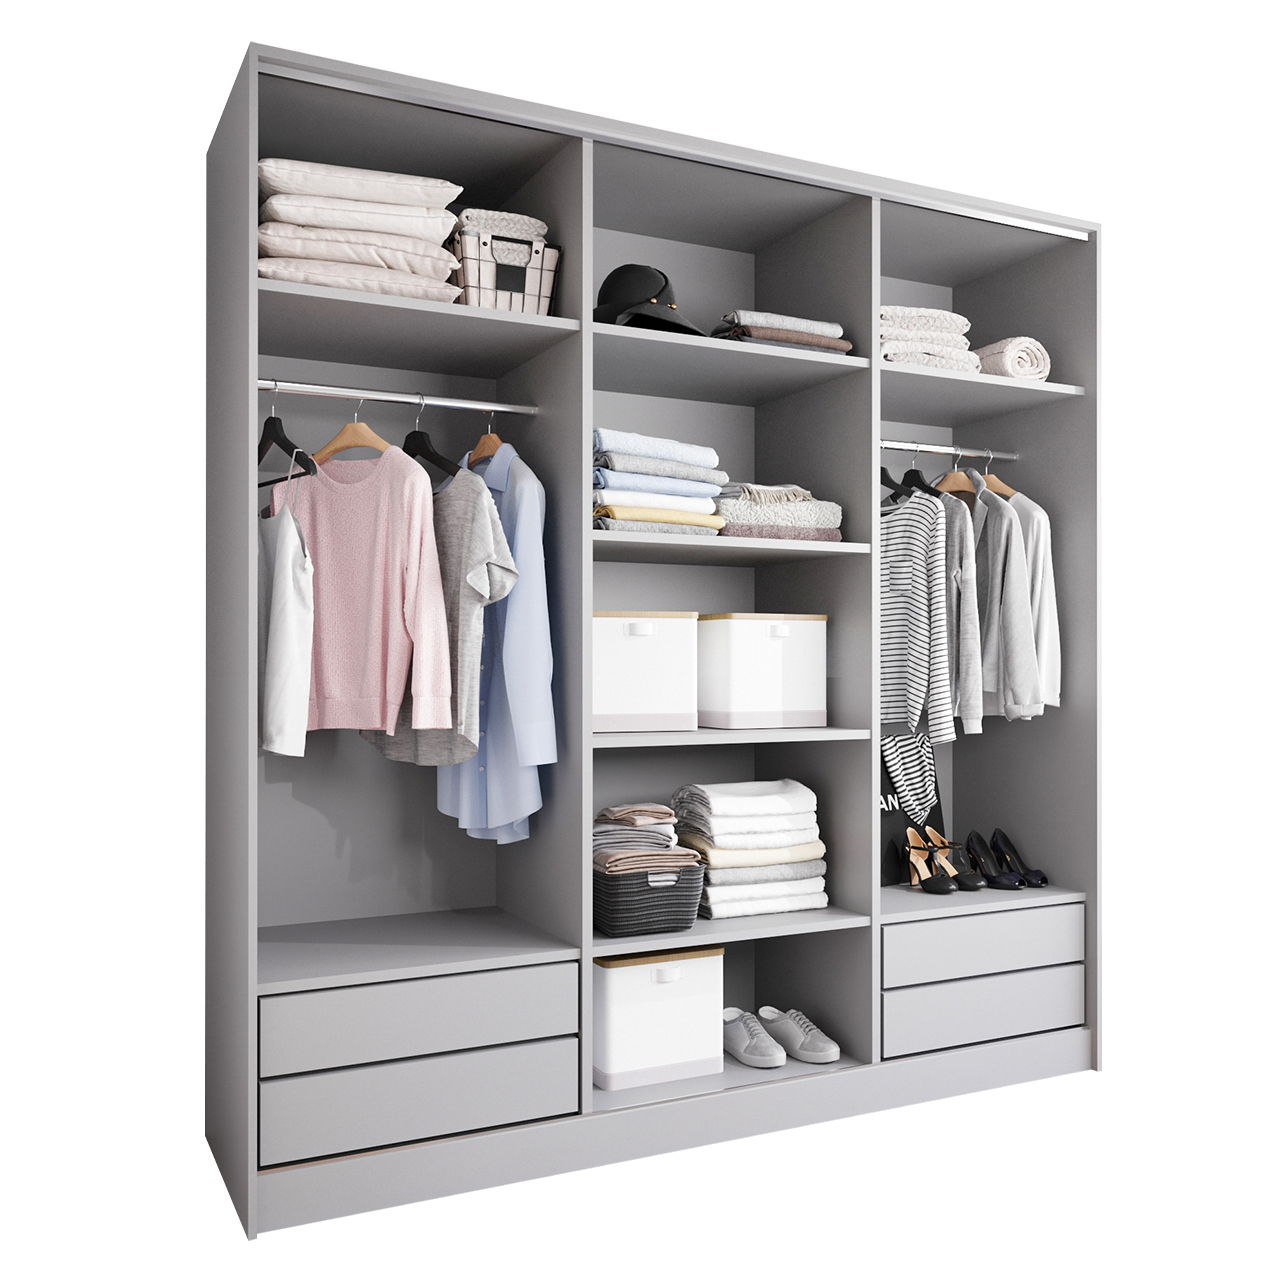 Sliding Wardrobe with Drawers BRITTO D 200 grey